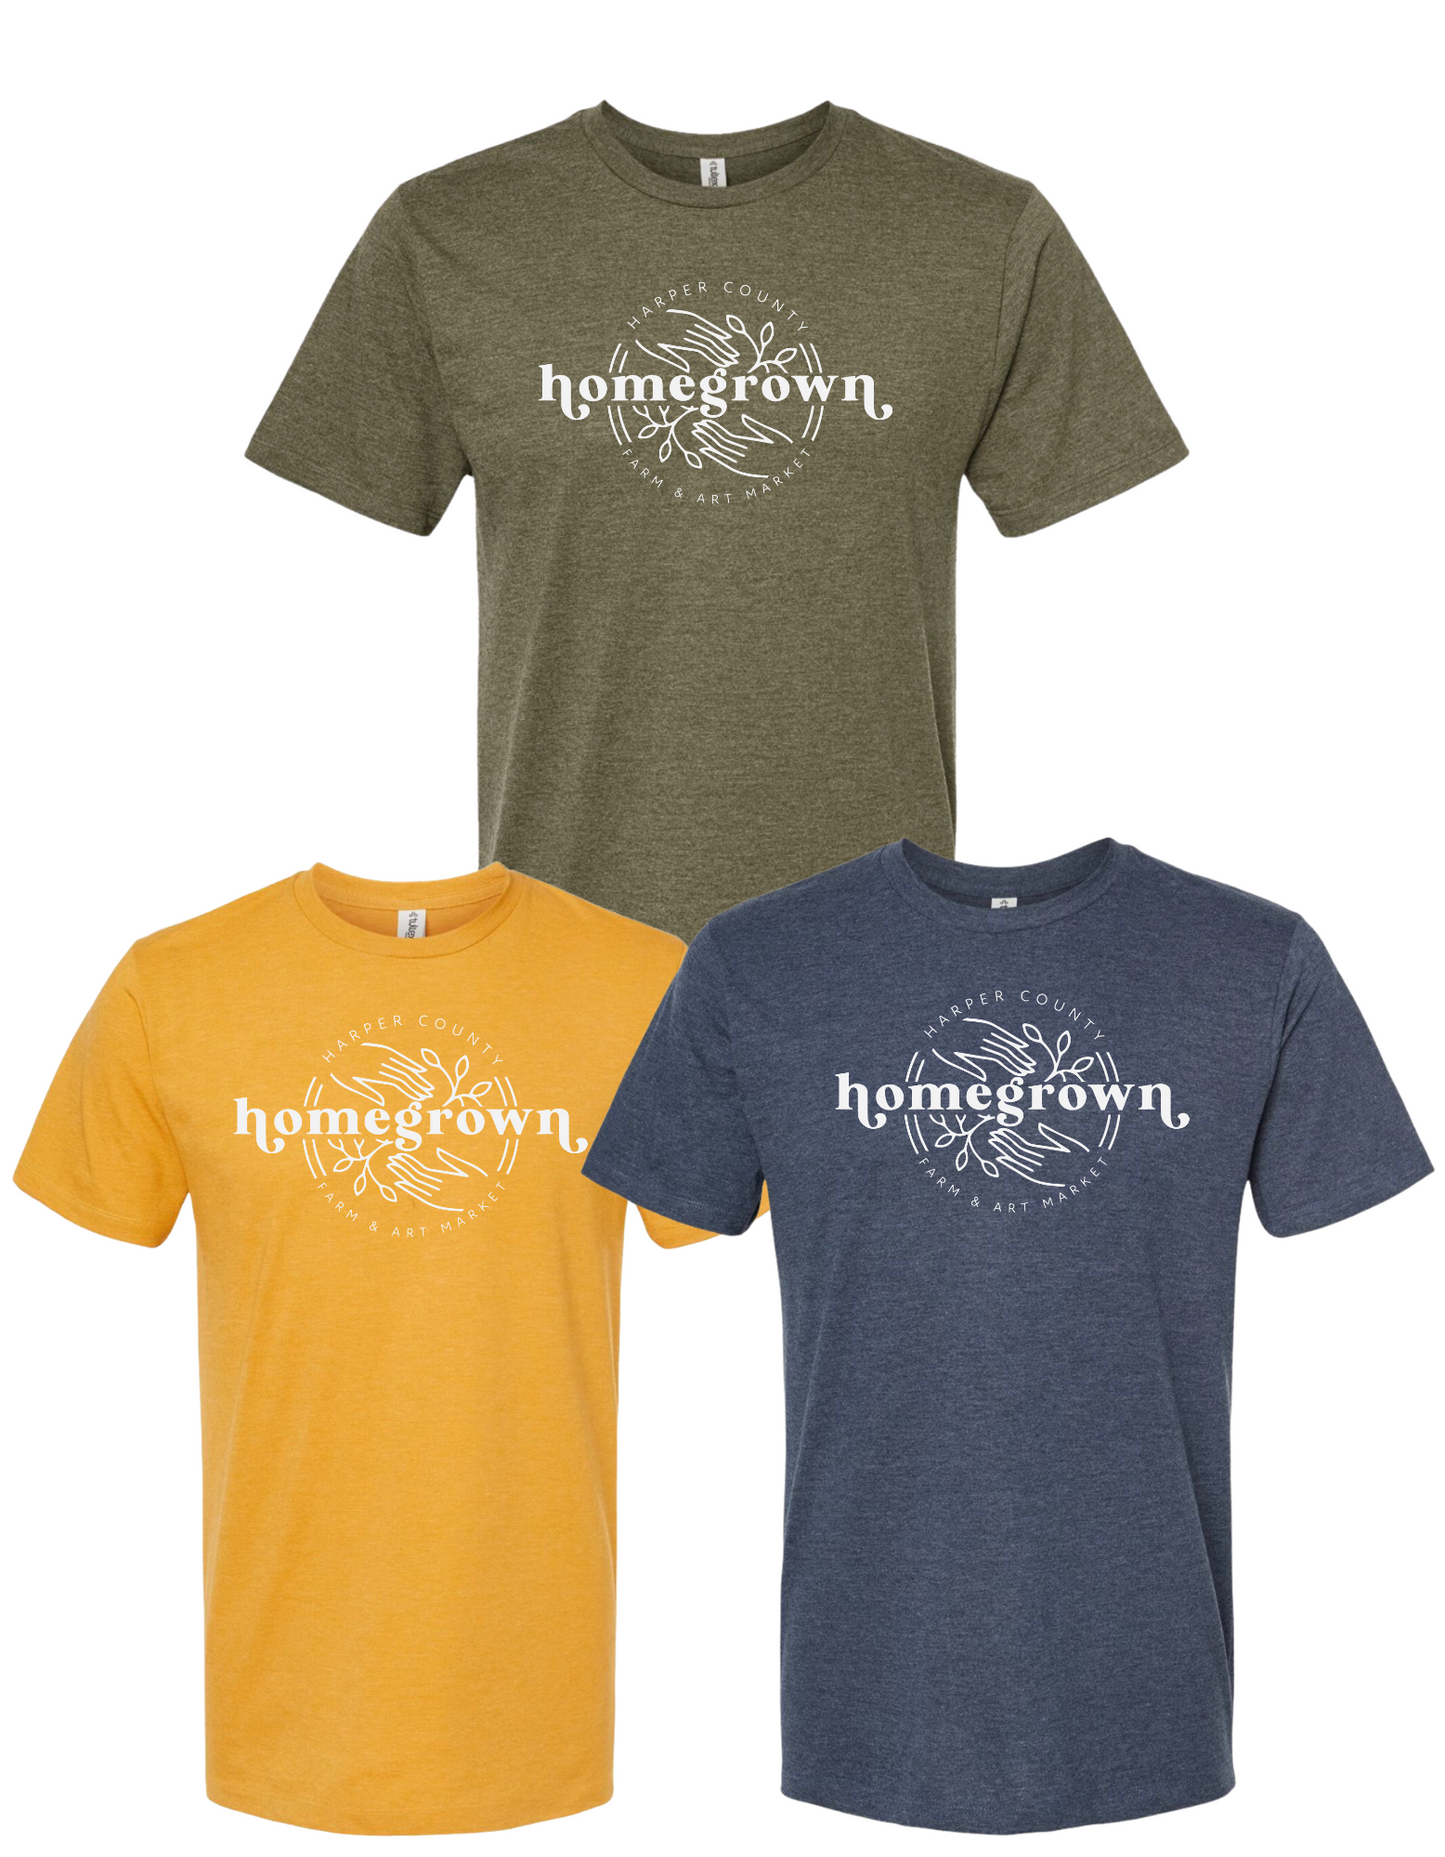 Harper County Homegrown Support Tees